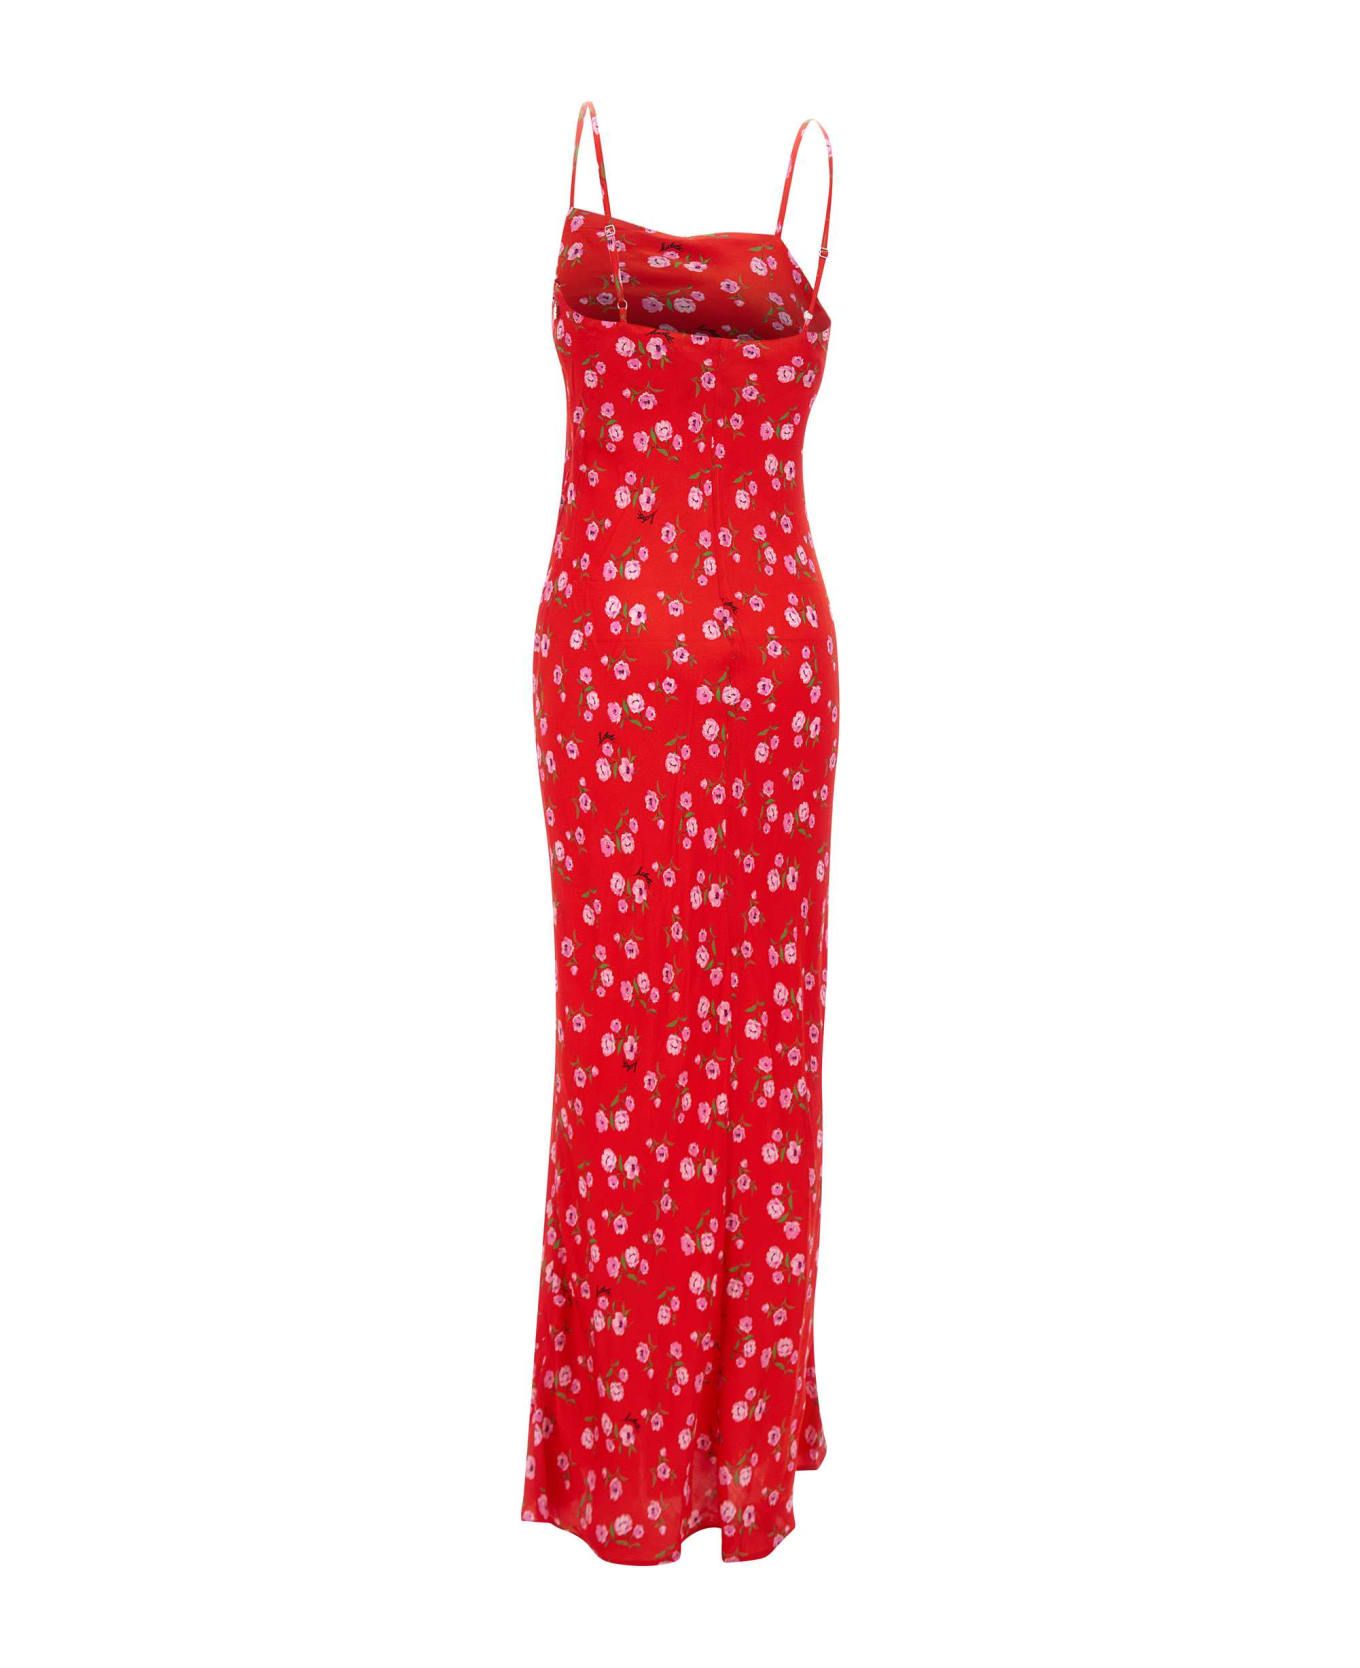 Rotate by Birger Christensen 'printed Maxi' Viscose Crepe Dress - Red